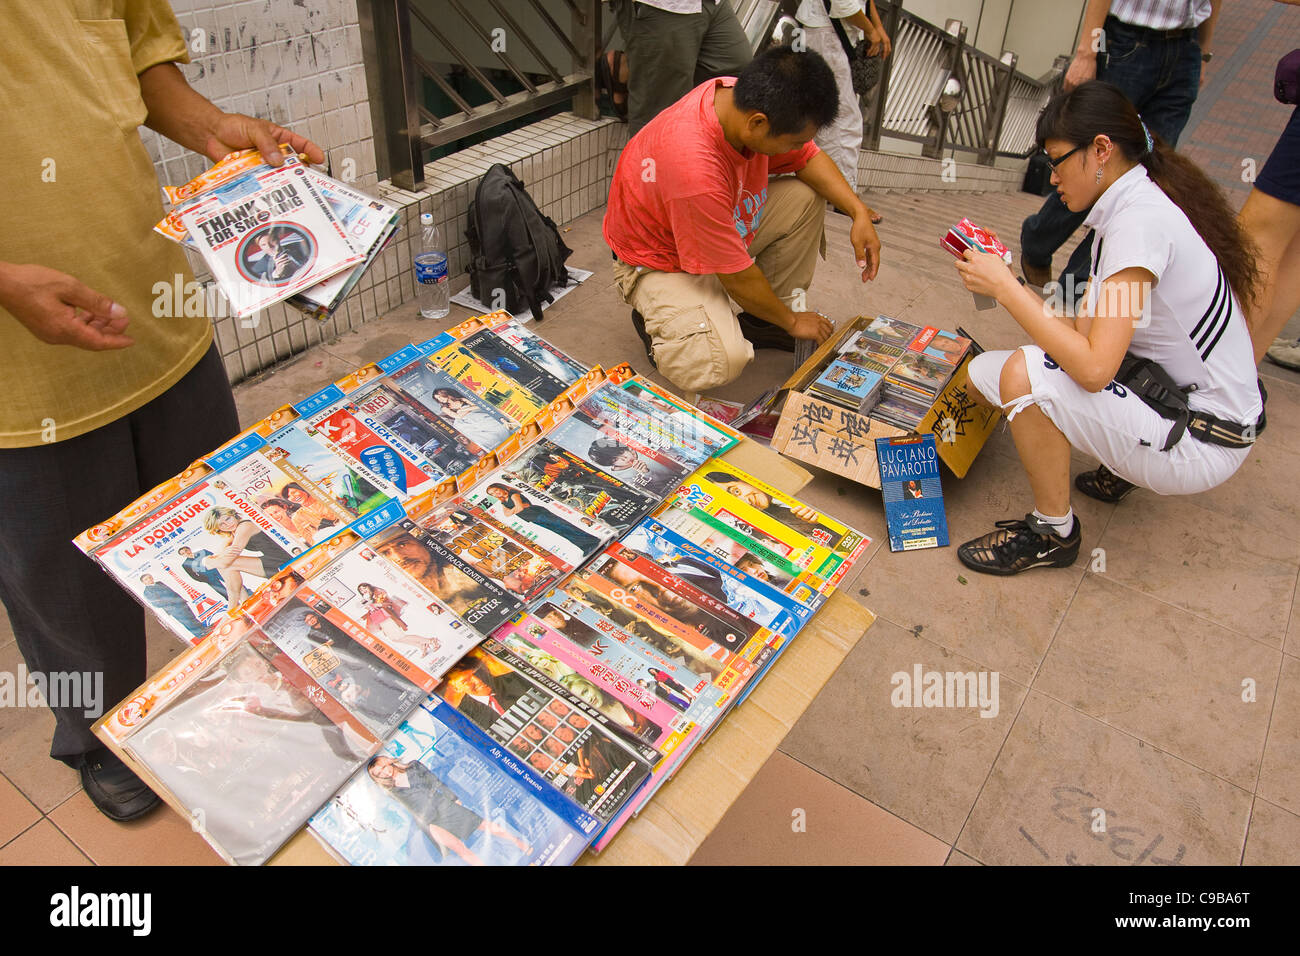 GUANGZHOU, GUANGDONG PROVINCE, CHINA - Street vendor selling pirate DVDs of current hit movies and television shows, and CDs Stock Photo